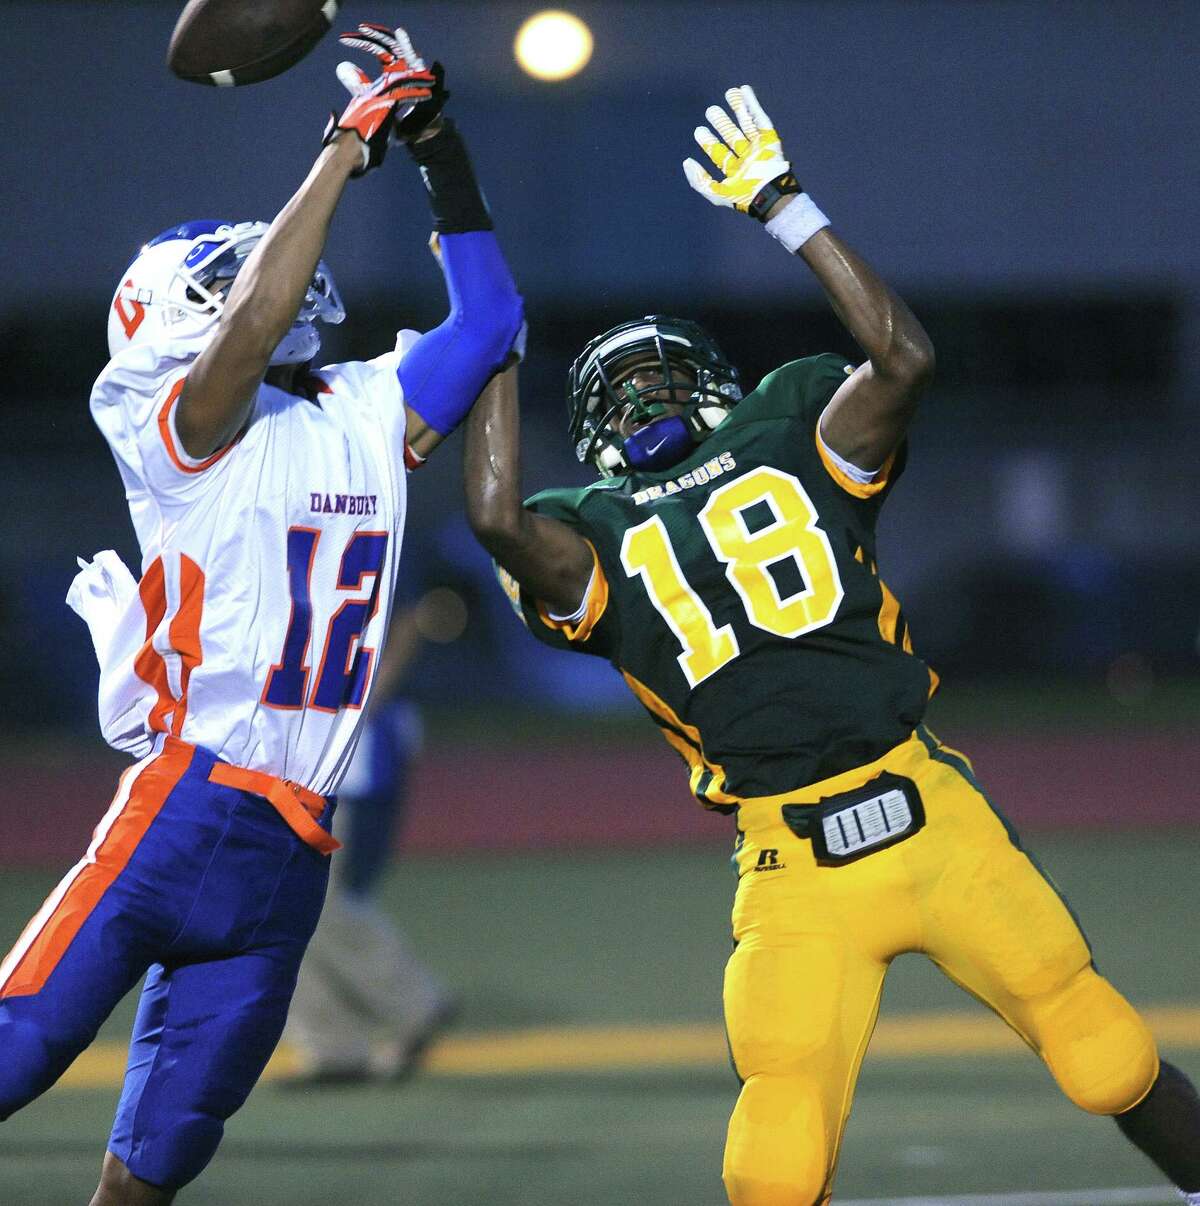 (Peter Casolino — New Haven Register) Danbury's Anferny Ith breaks up a pass intended for Hamden's Trevor Perry in the first quarter.